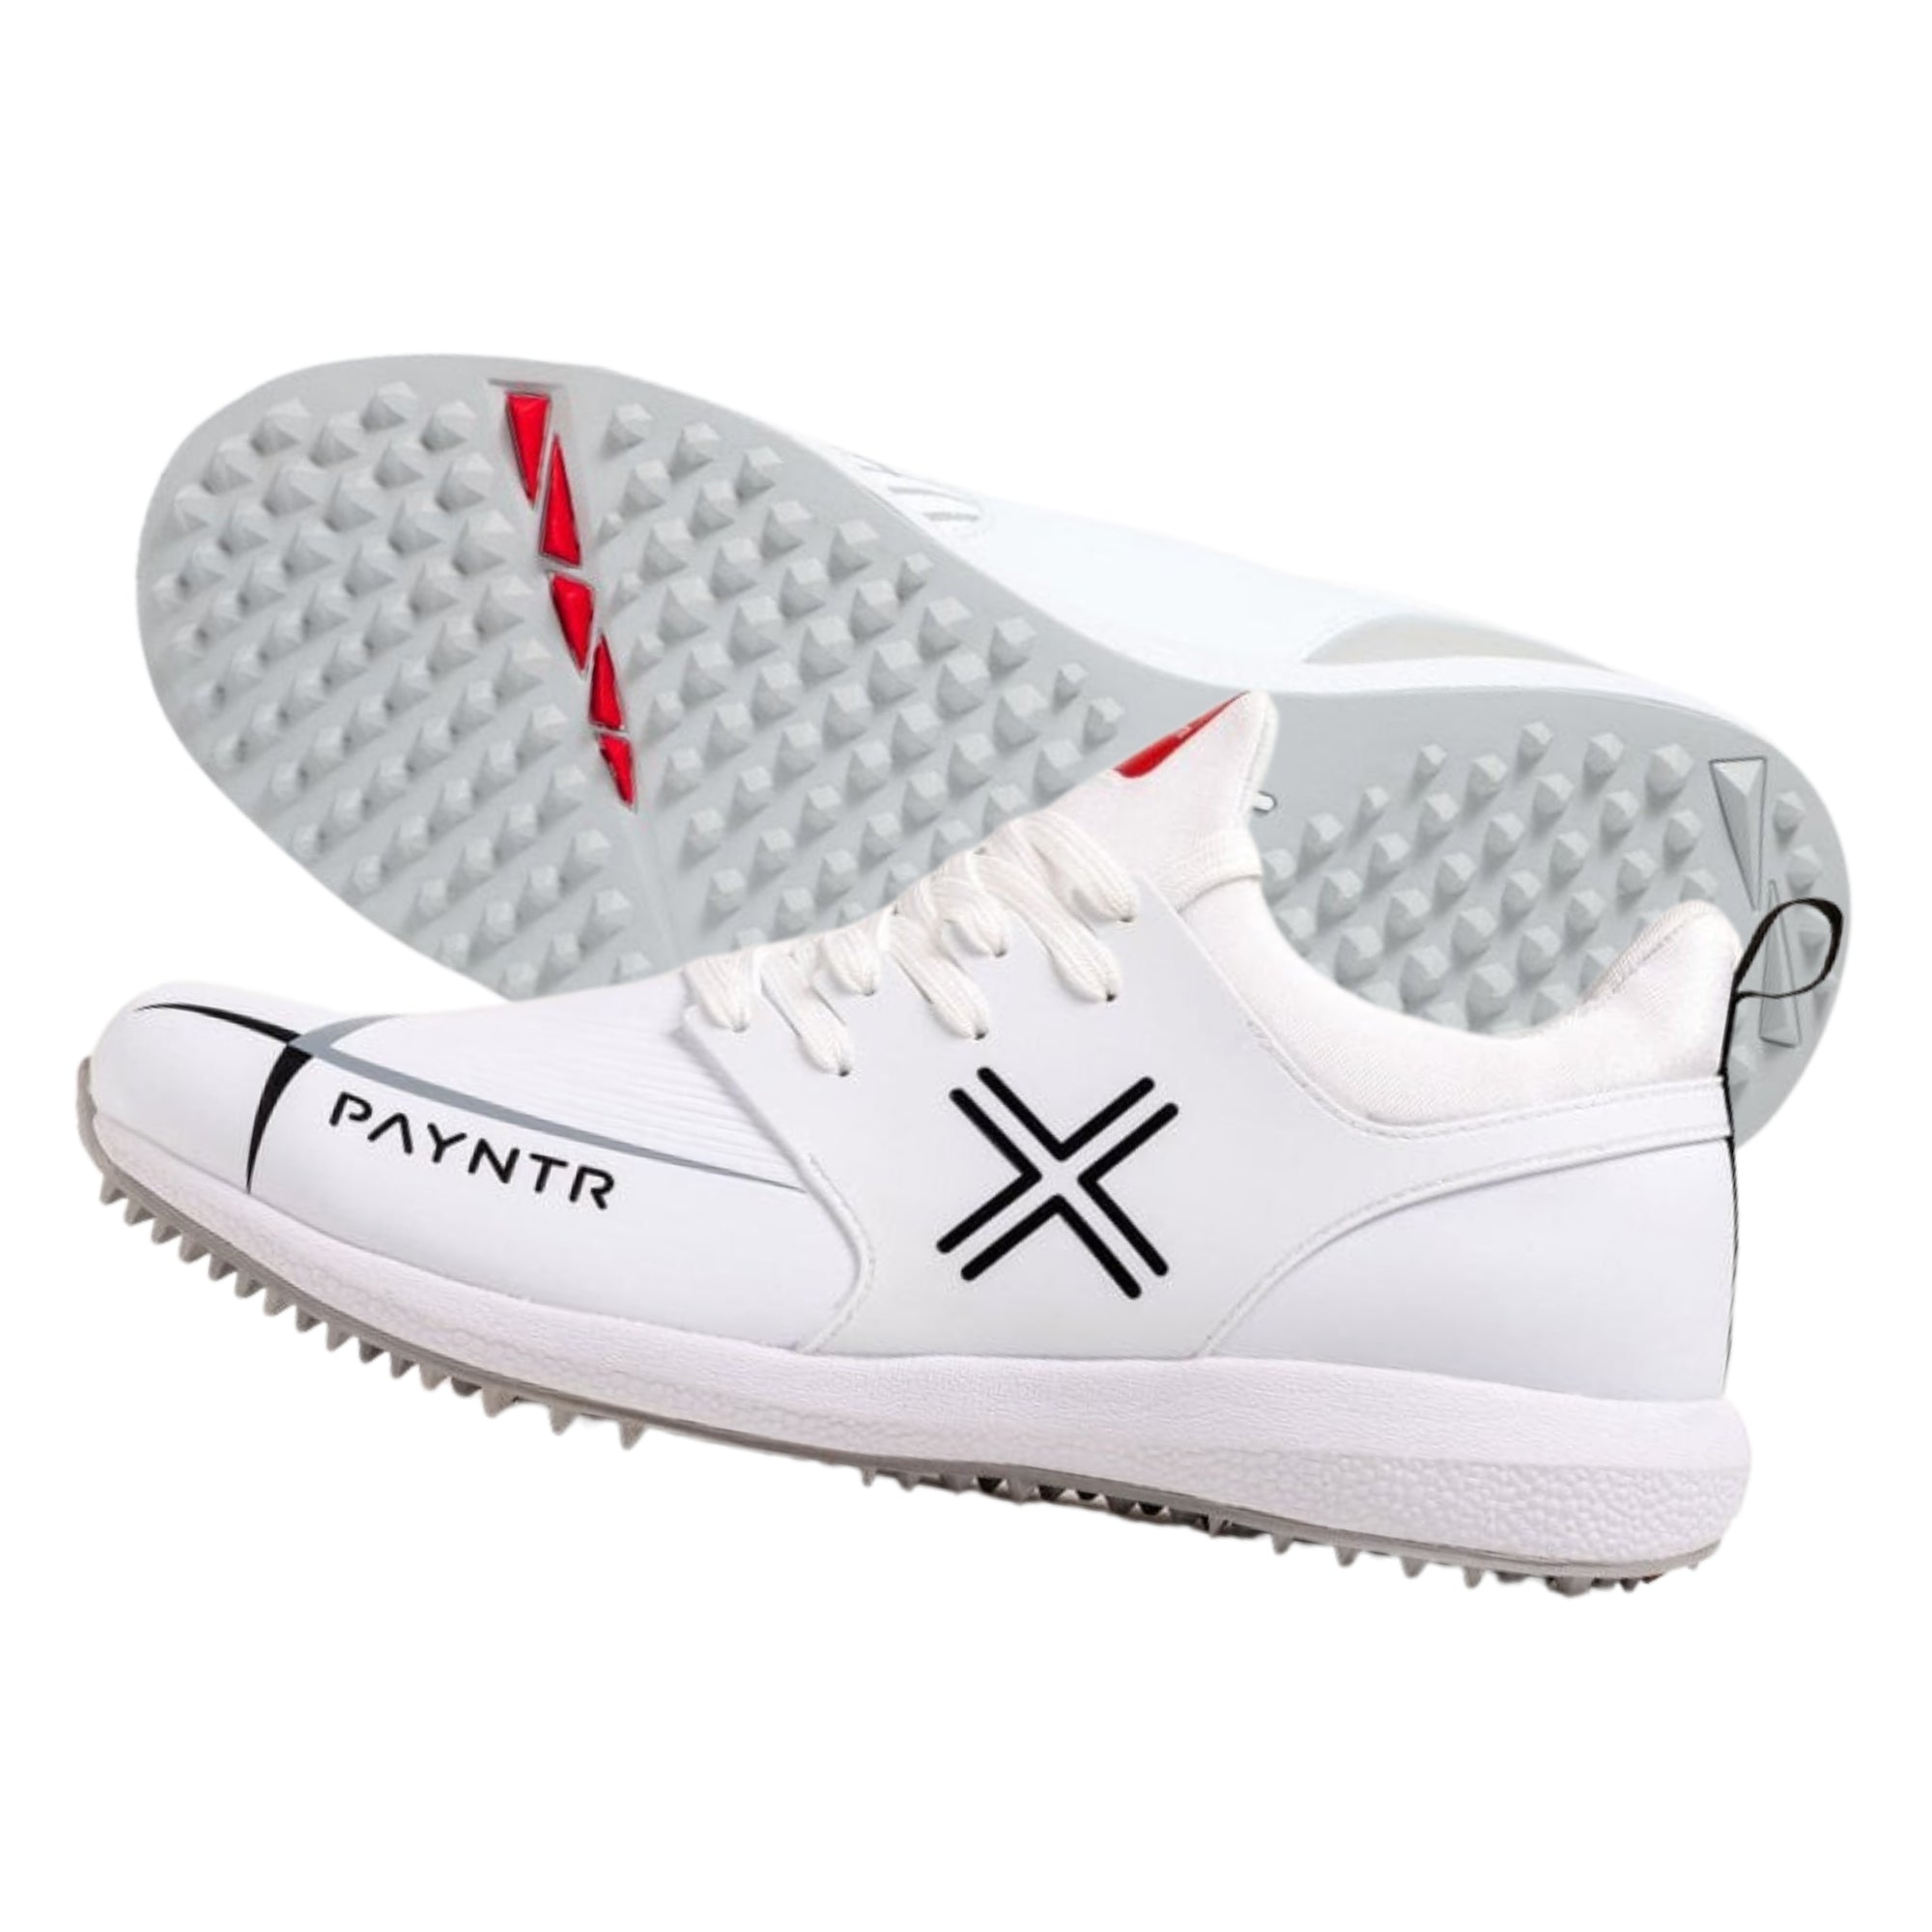 Payntr Cricket Shoes, Model X MK3 Pimple - All White